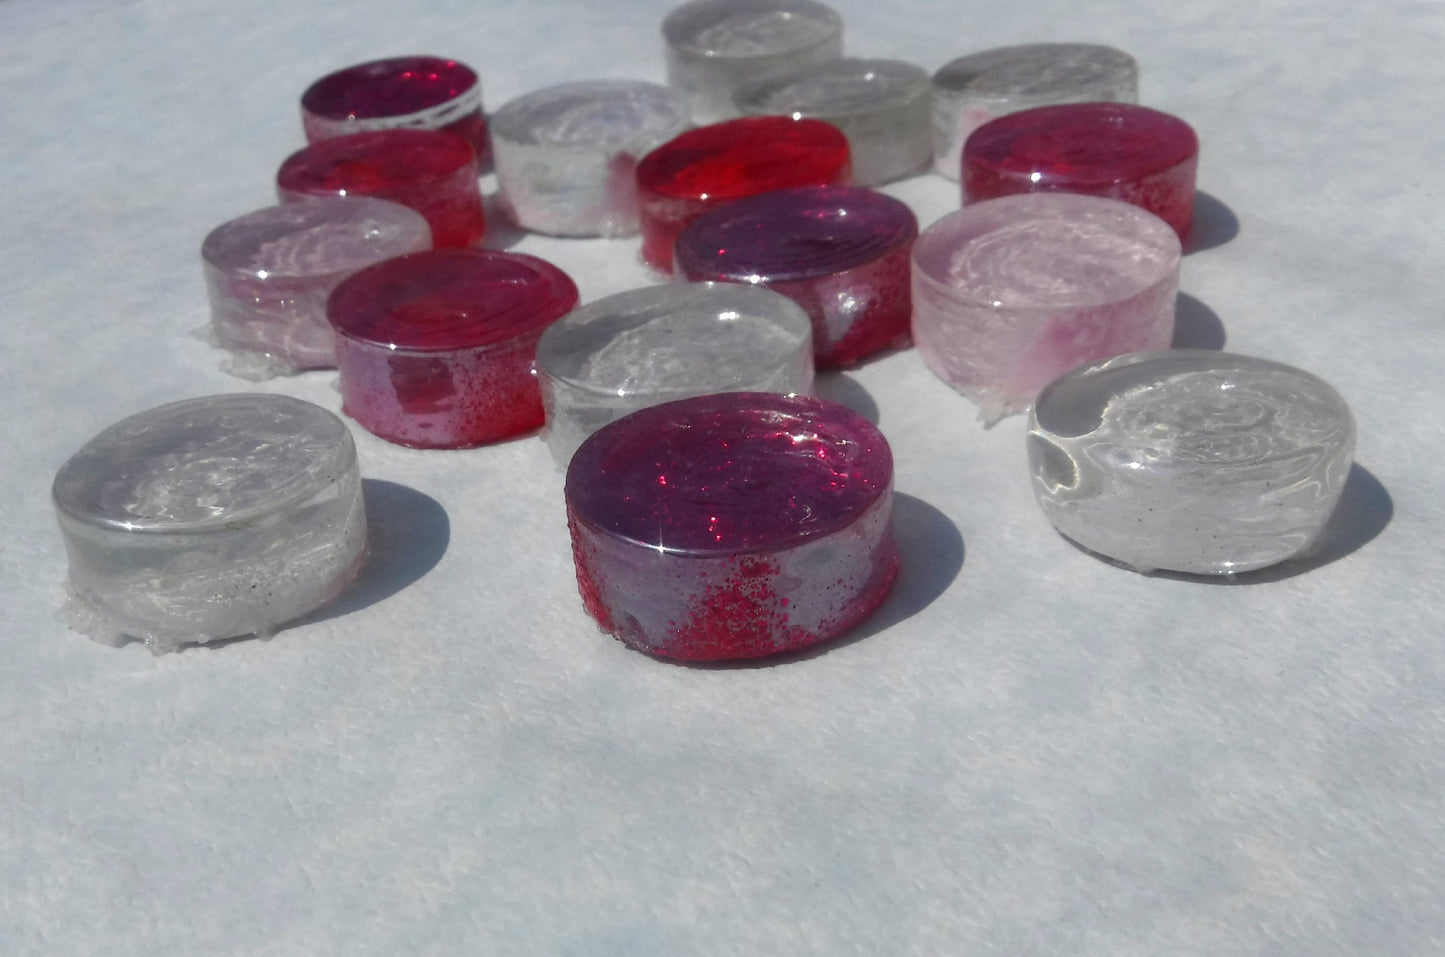 Pretty in Pink Glass Tiles - 25 Tiles in Shades of Shabby Pink - Some Glitter - 2 cm - Crystal Penny Rounds